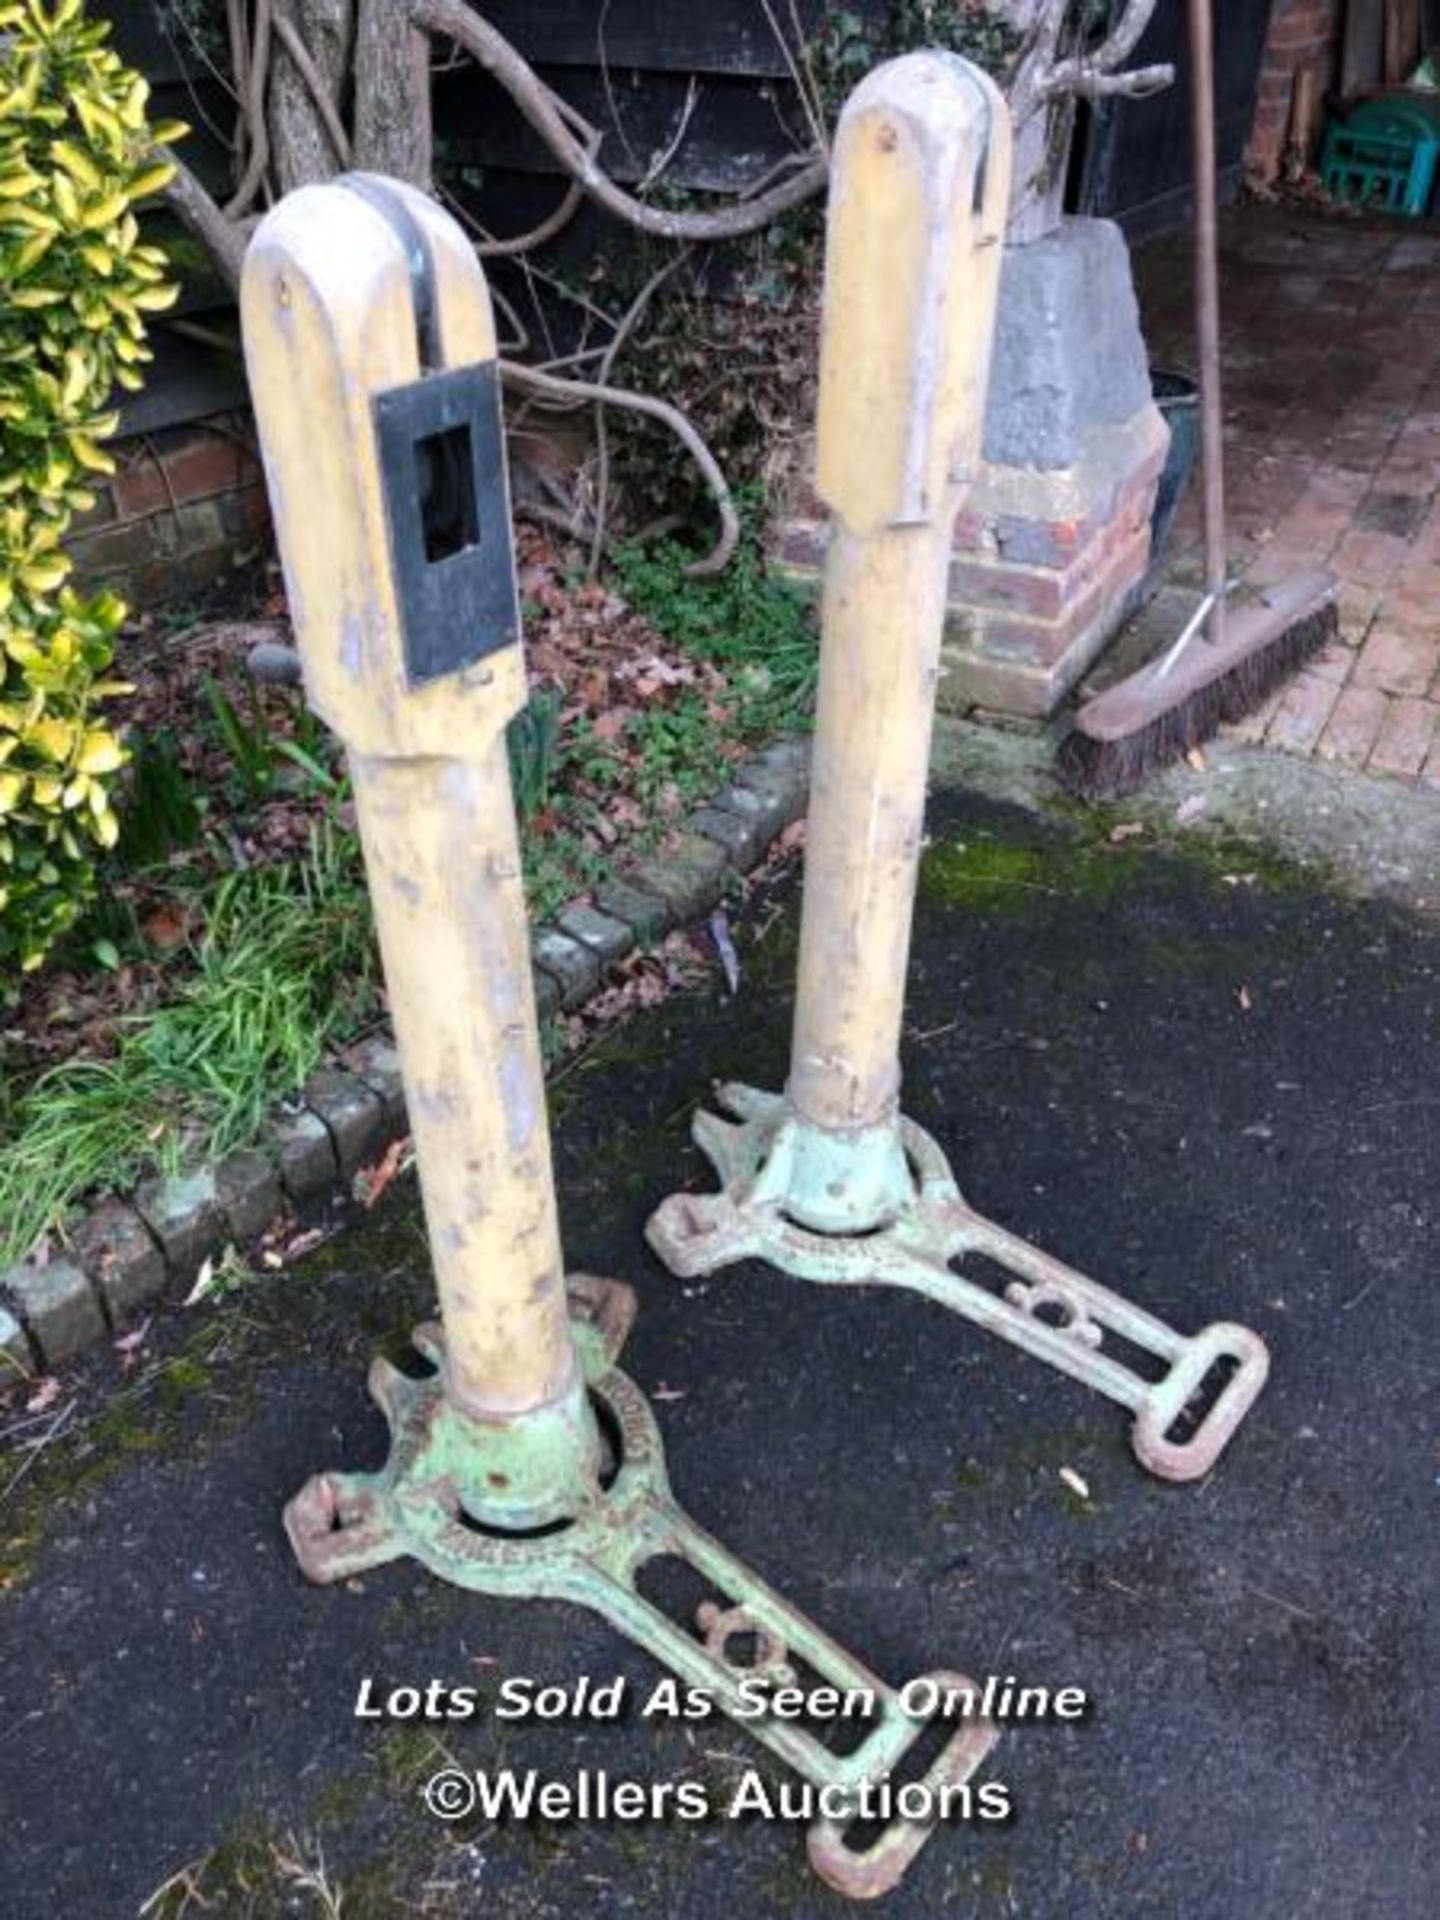 *PAIR OF EDWARDIAN SLAZENGER LAWN TENNIS NET POSTS, WOODEN POST AND CAST IRON BASE, UNRESTORED AND